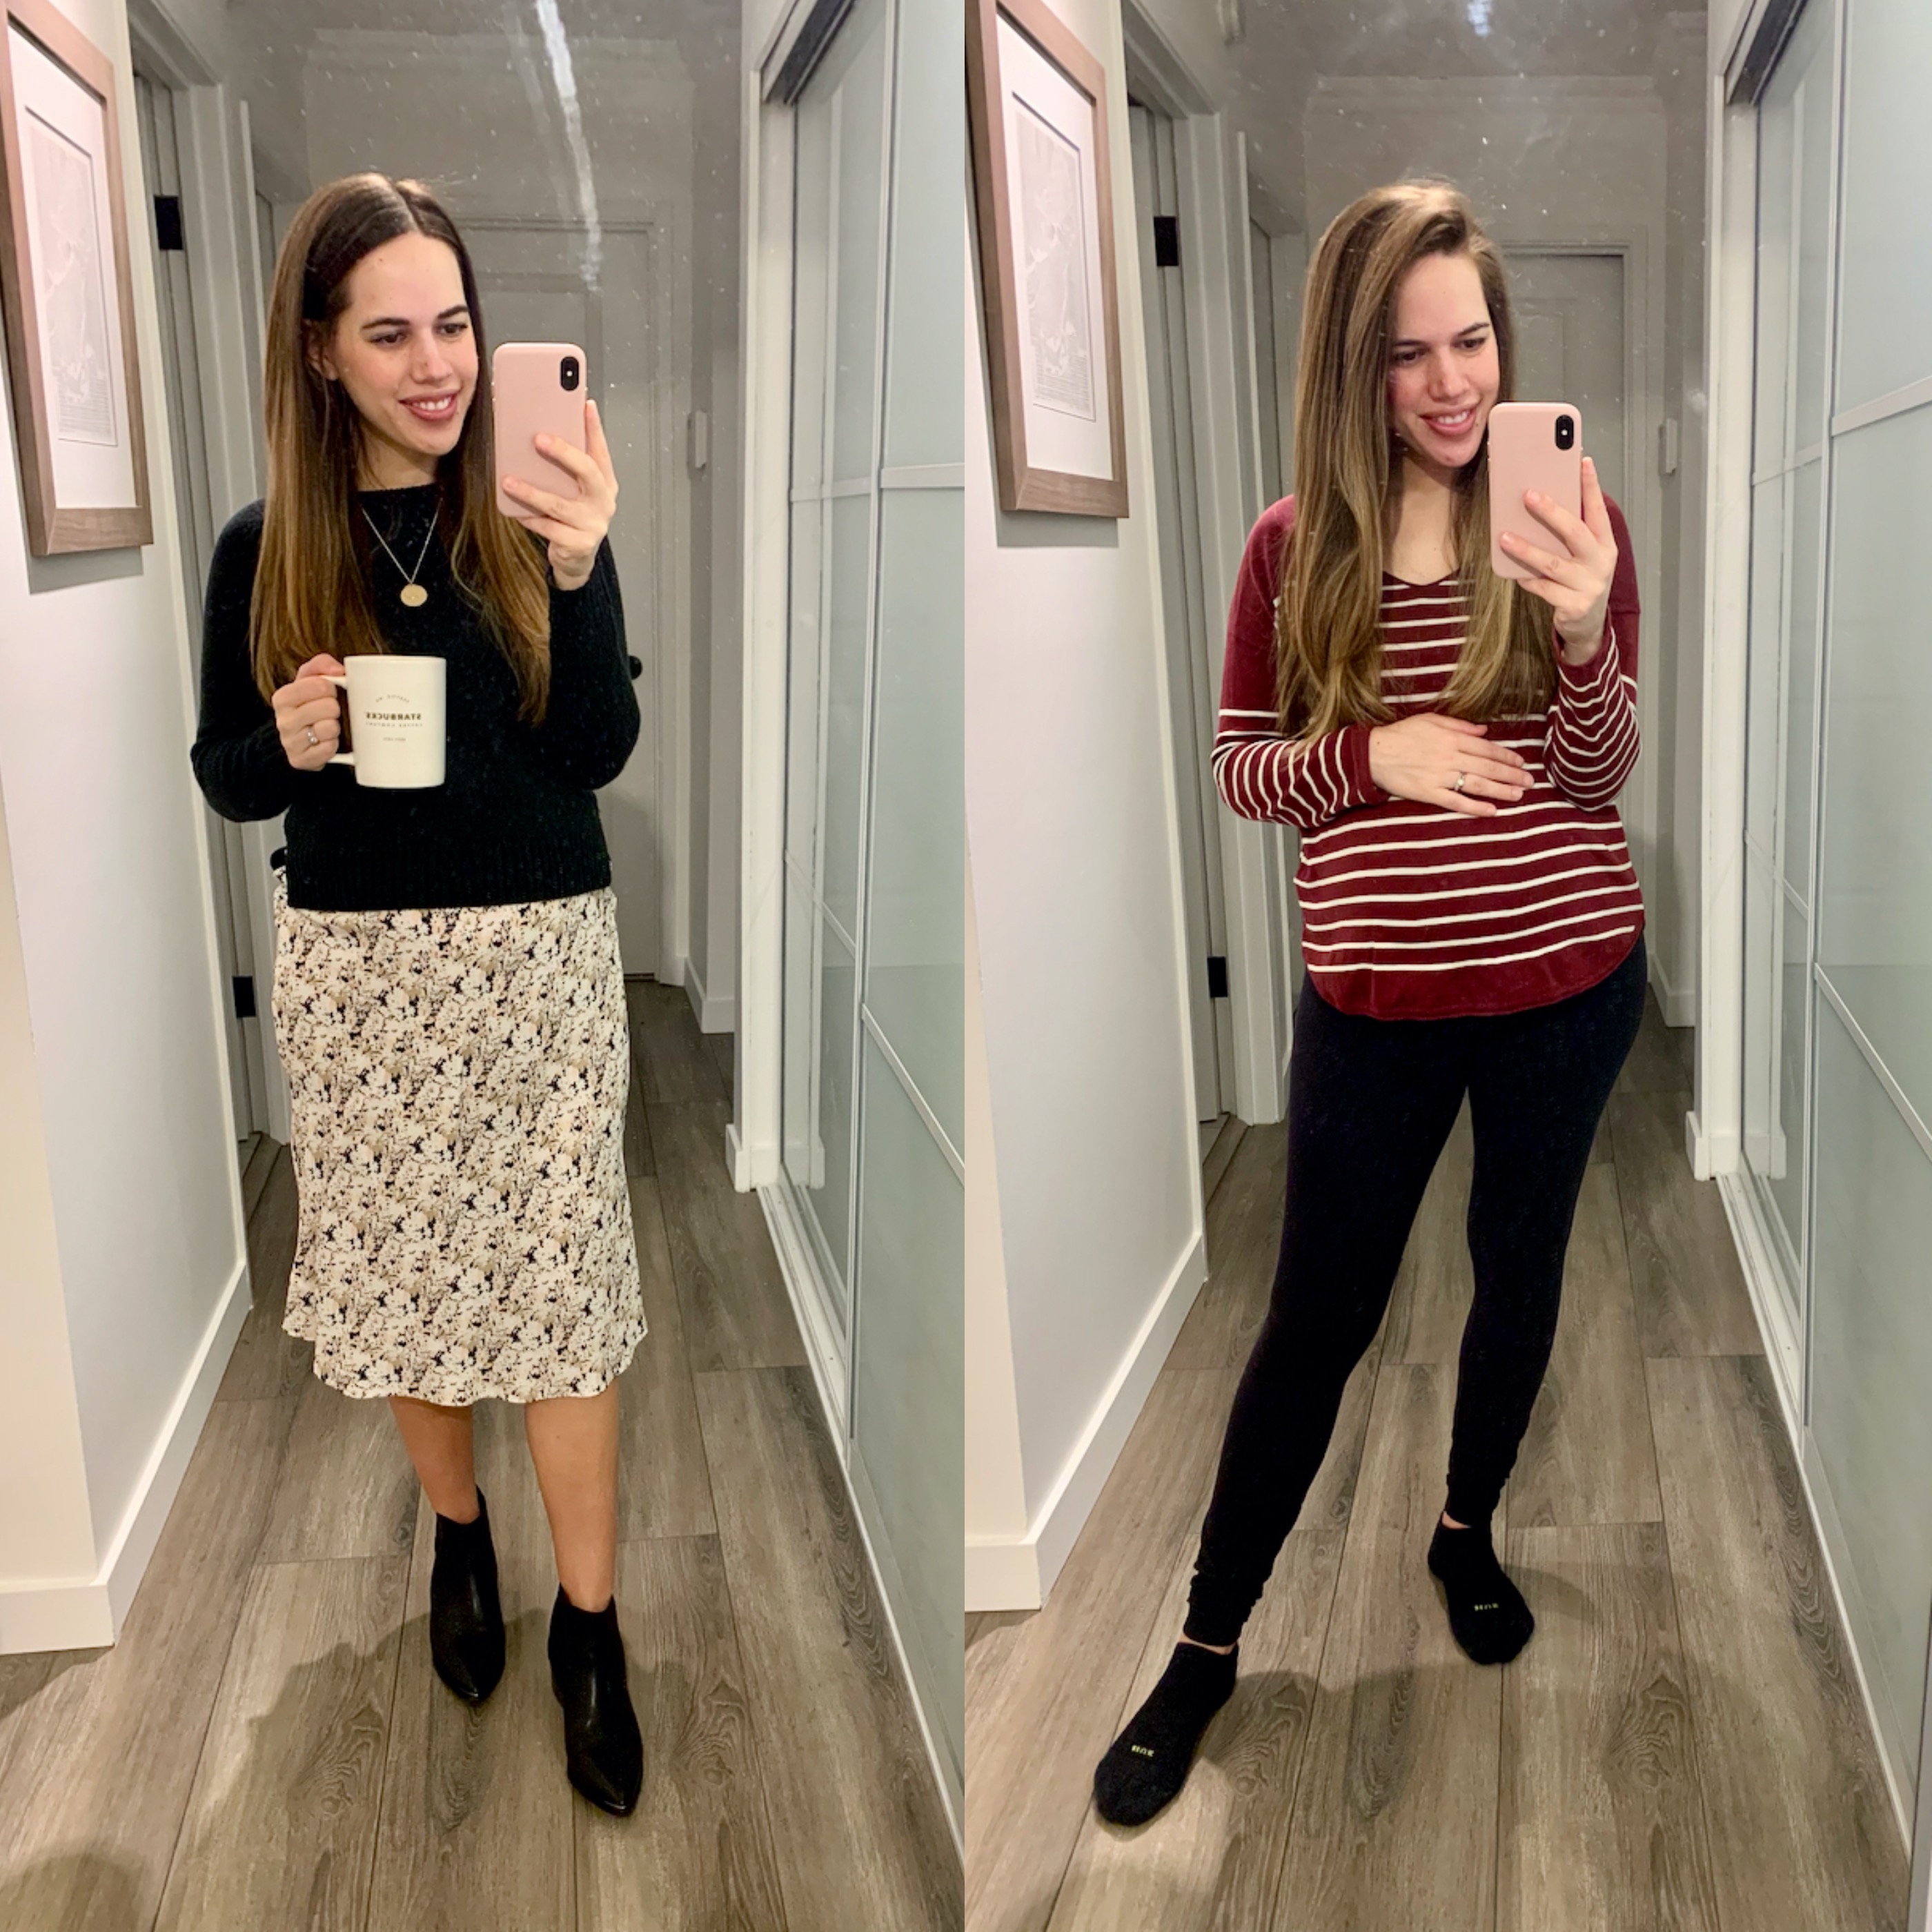 Jules in Flats - What I Wore to Work in February (Business Casual Workwear on a Budget) Week 1